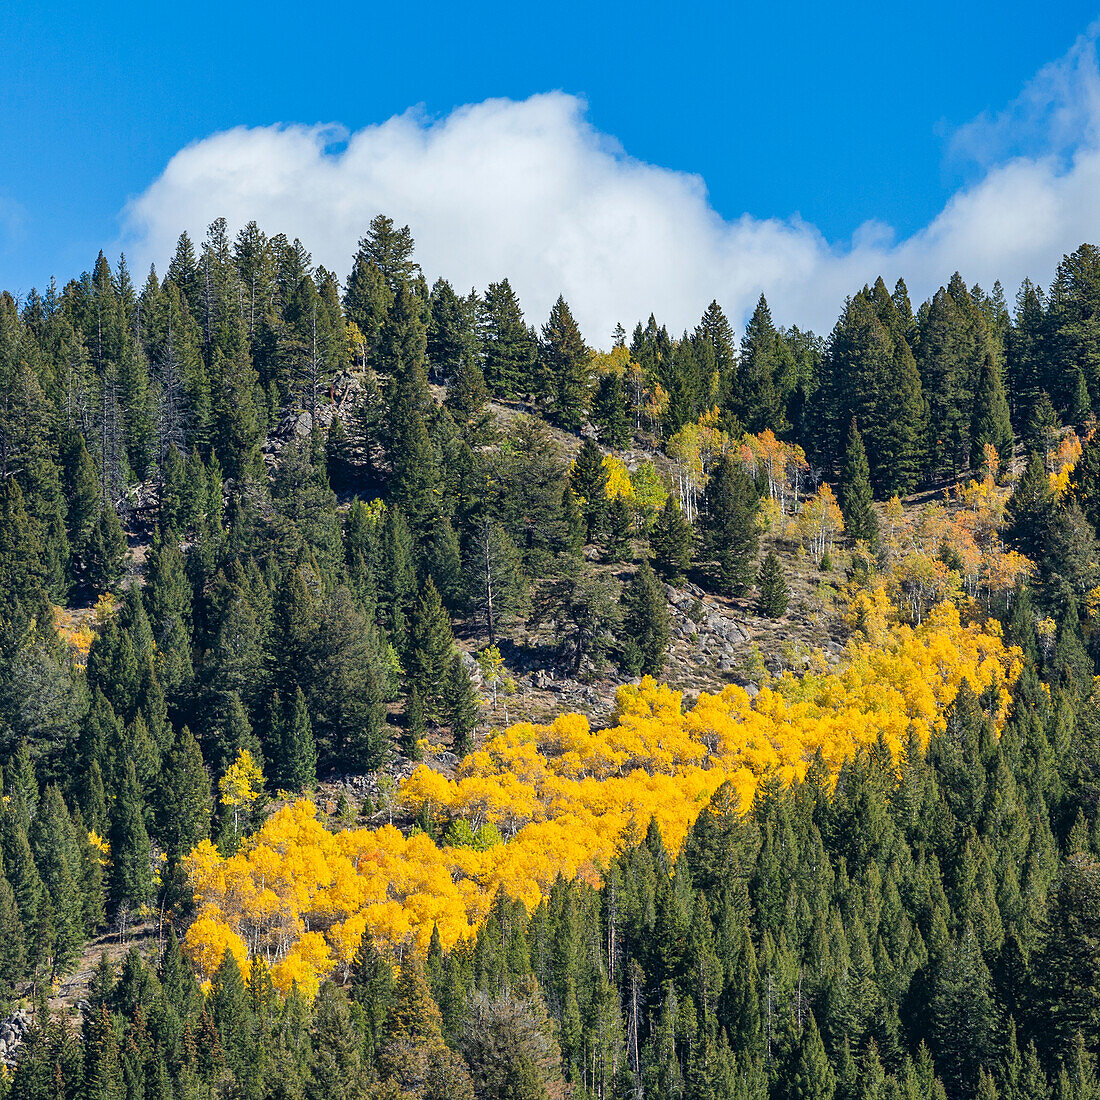 USA, Idaho, Stanley, Fall colors in trees at mountains 